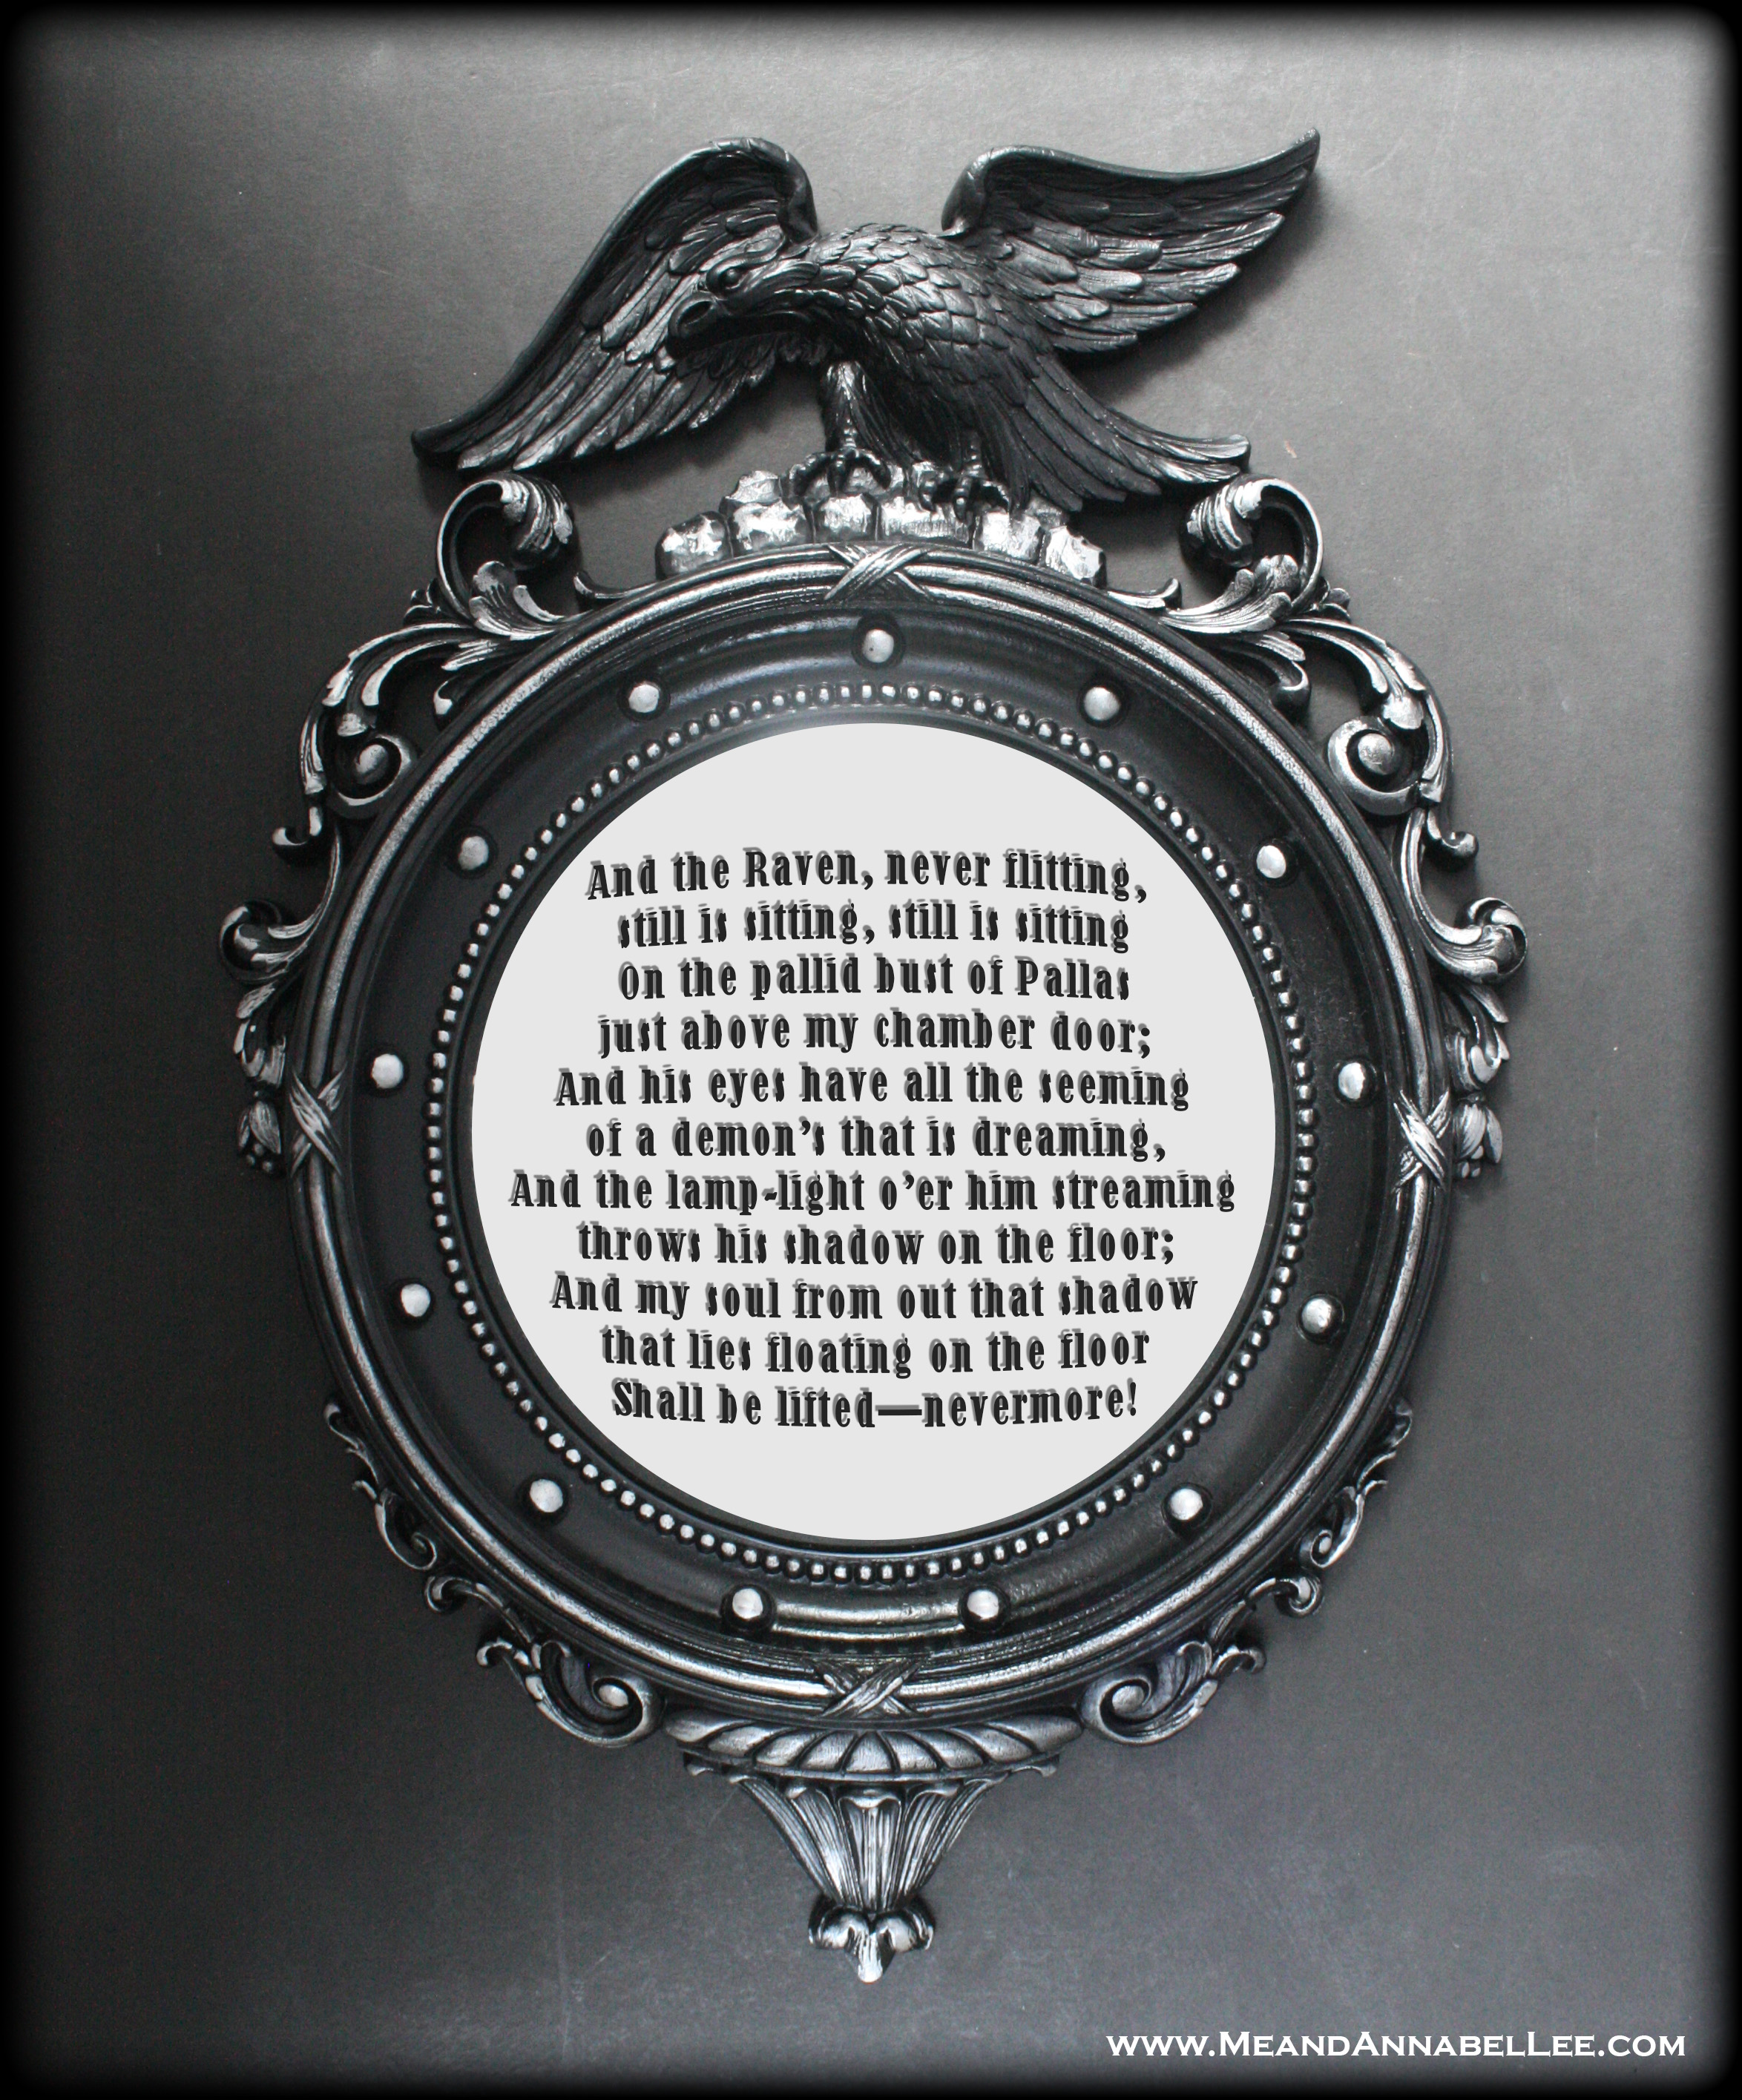 Federal Mirror Makeover | Edgar Allan Poe Wall Art | The Raven Quote | How to apply vinyl to a curved surface | Cricut Tutorial | Goth Home Decor | www.MeandAnnabelLee.com